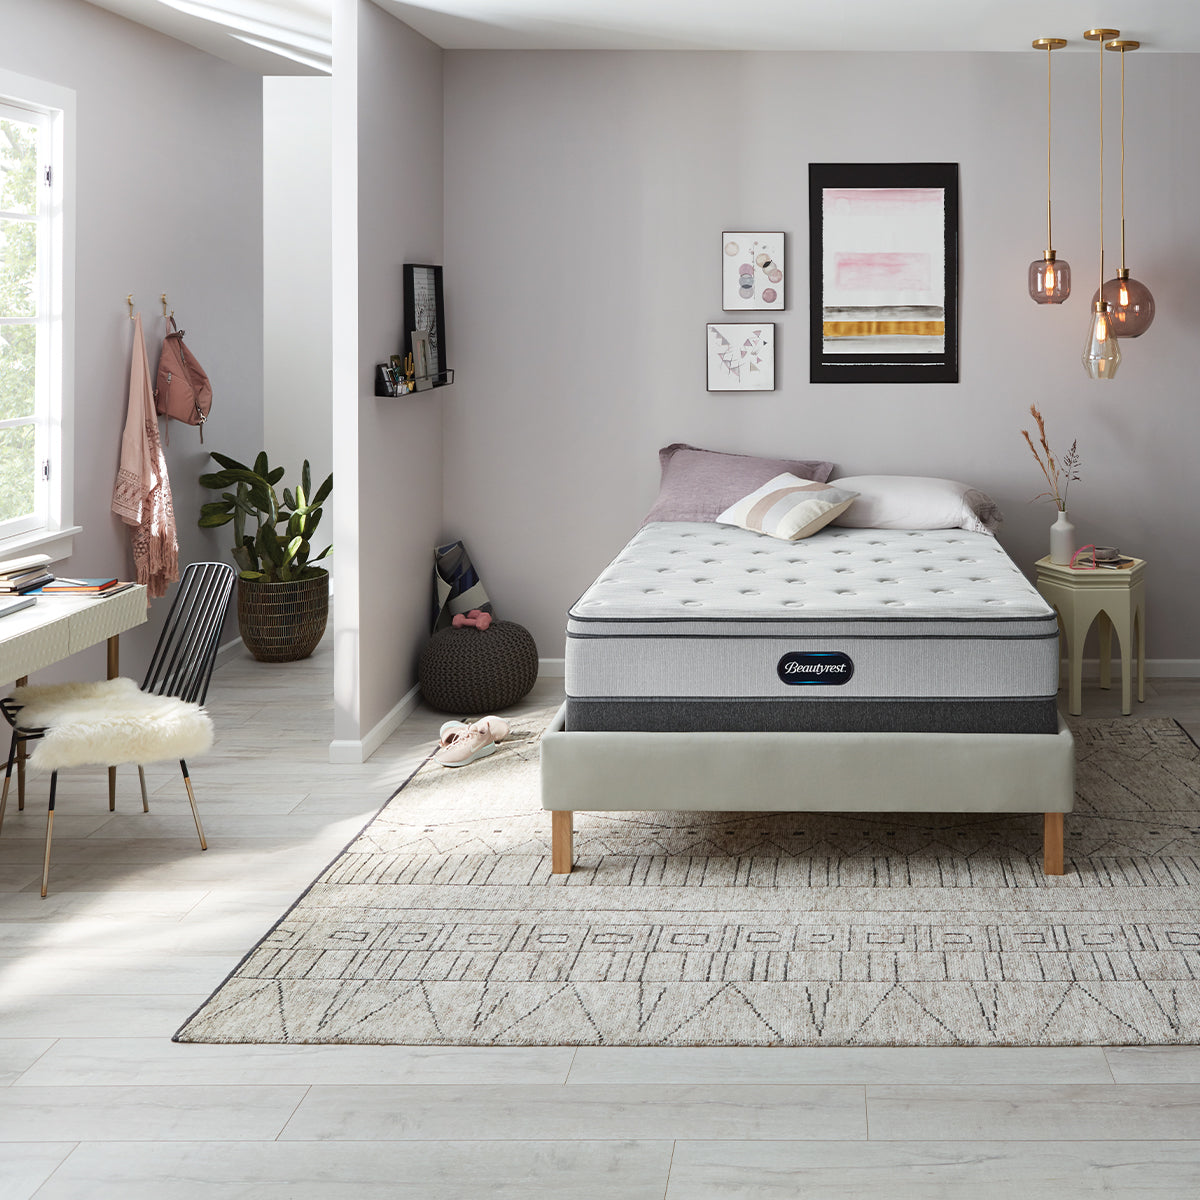 Picture of Beautyrest BR800 Plush Euro Top Mattress